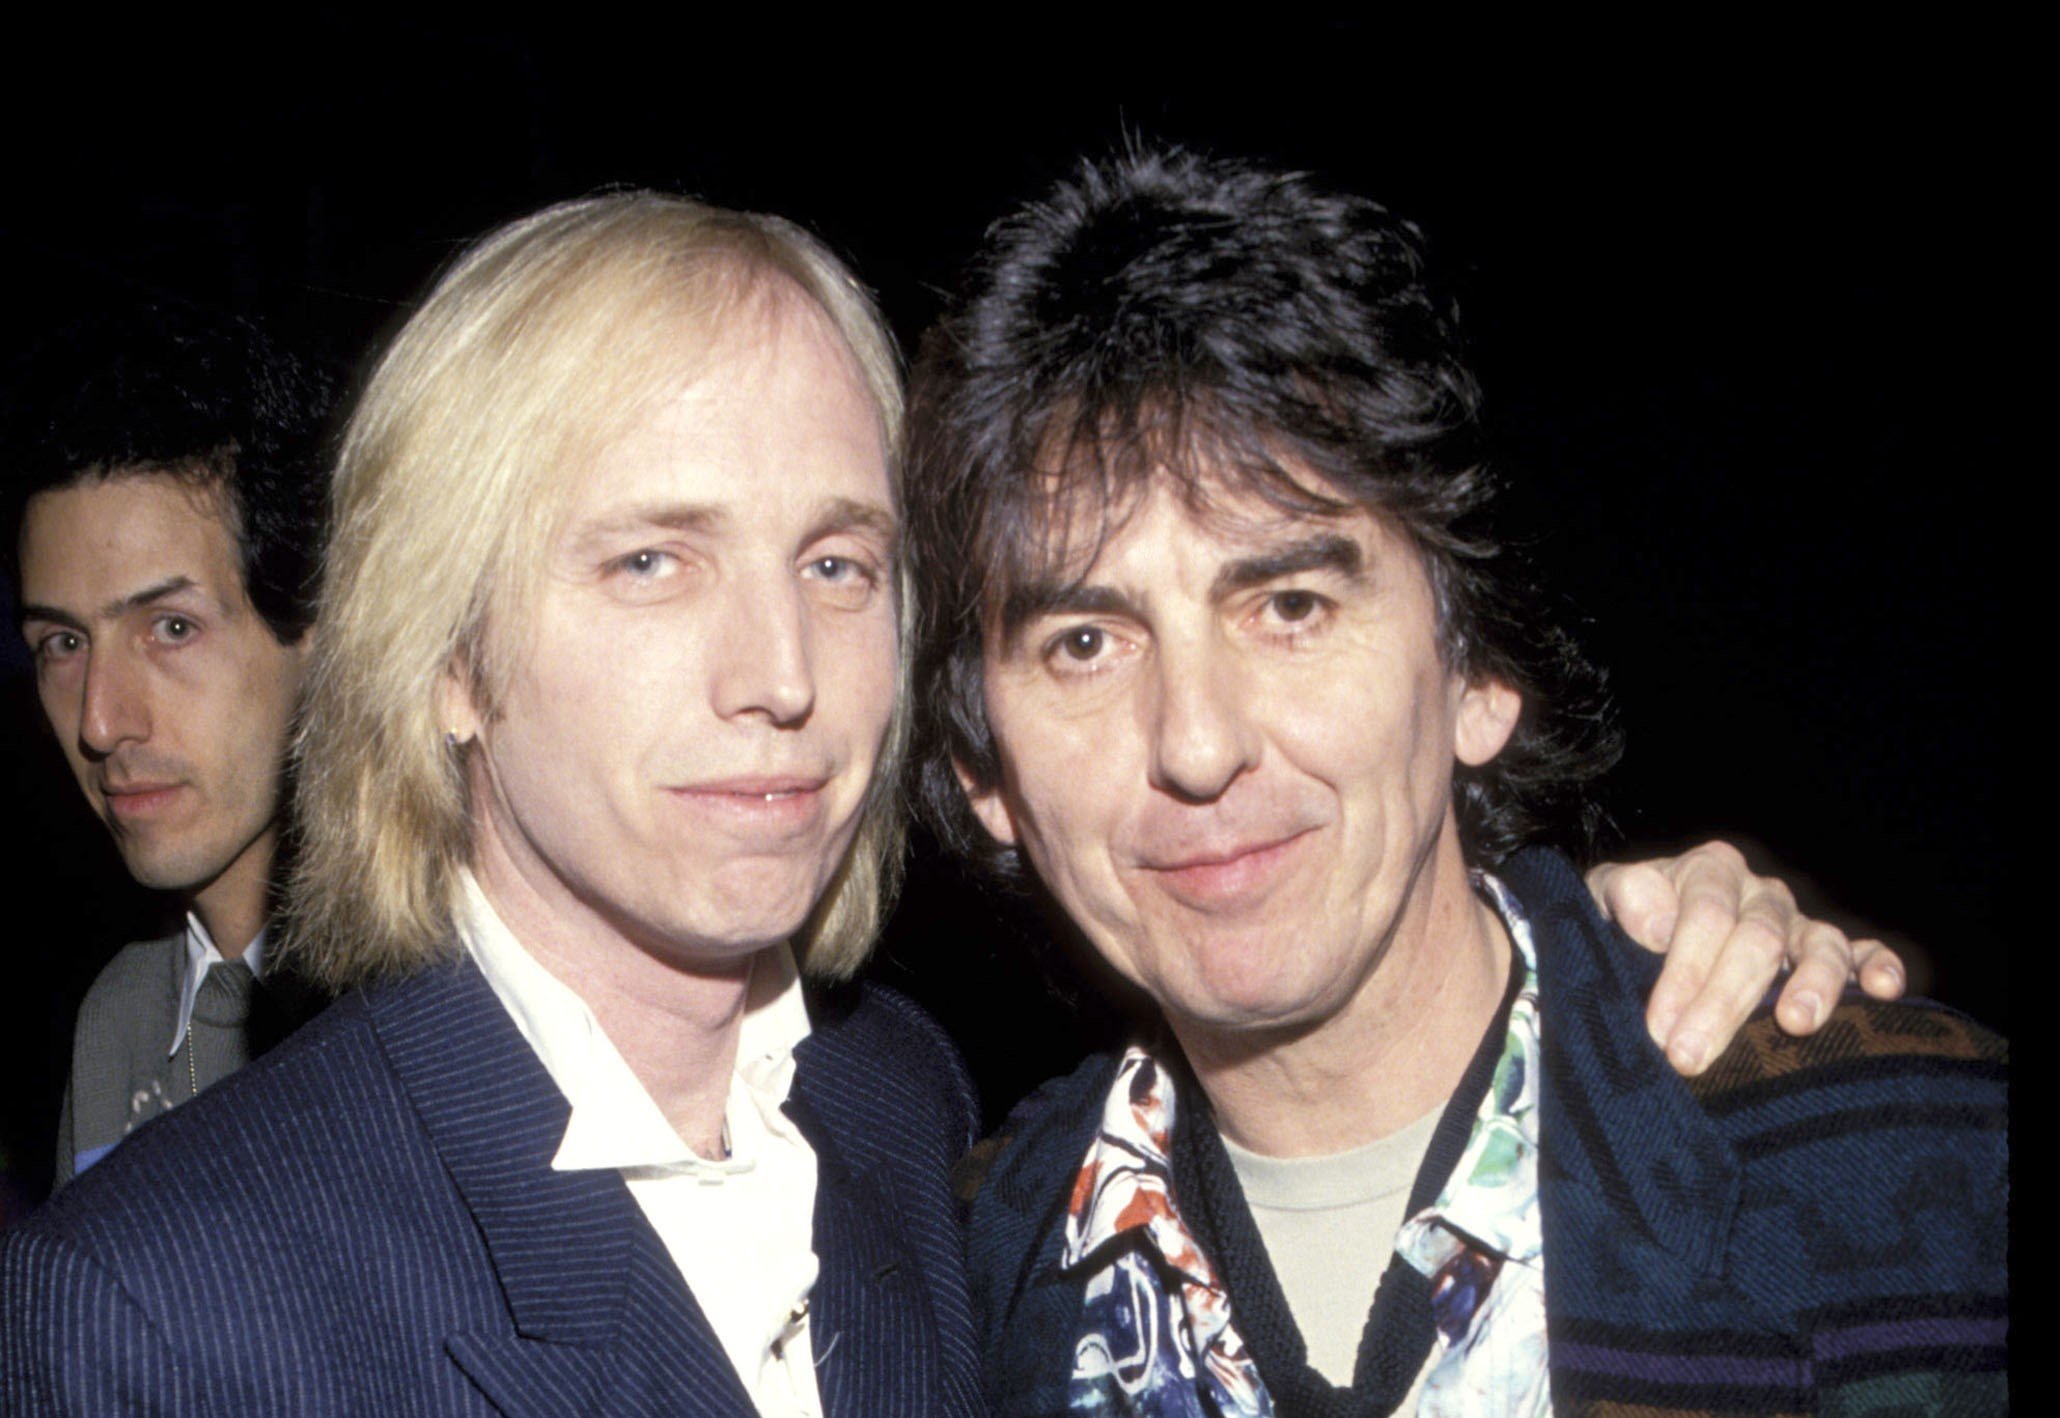 Tom Petty stands with his arm around George Harrison's shoulders.